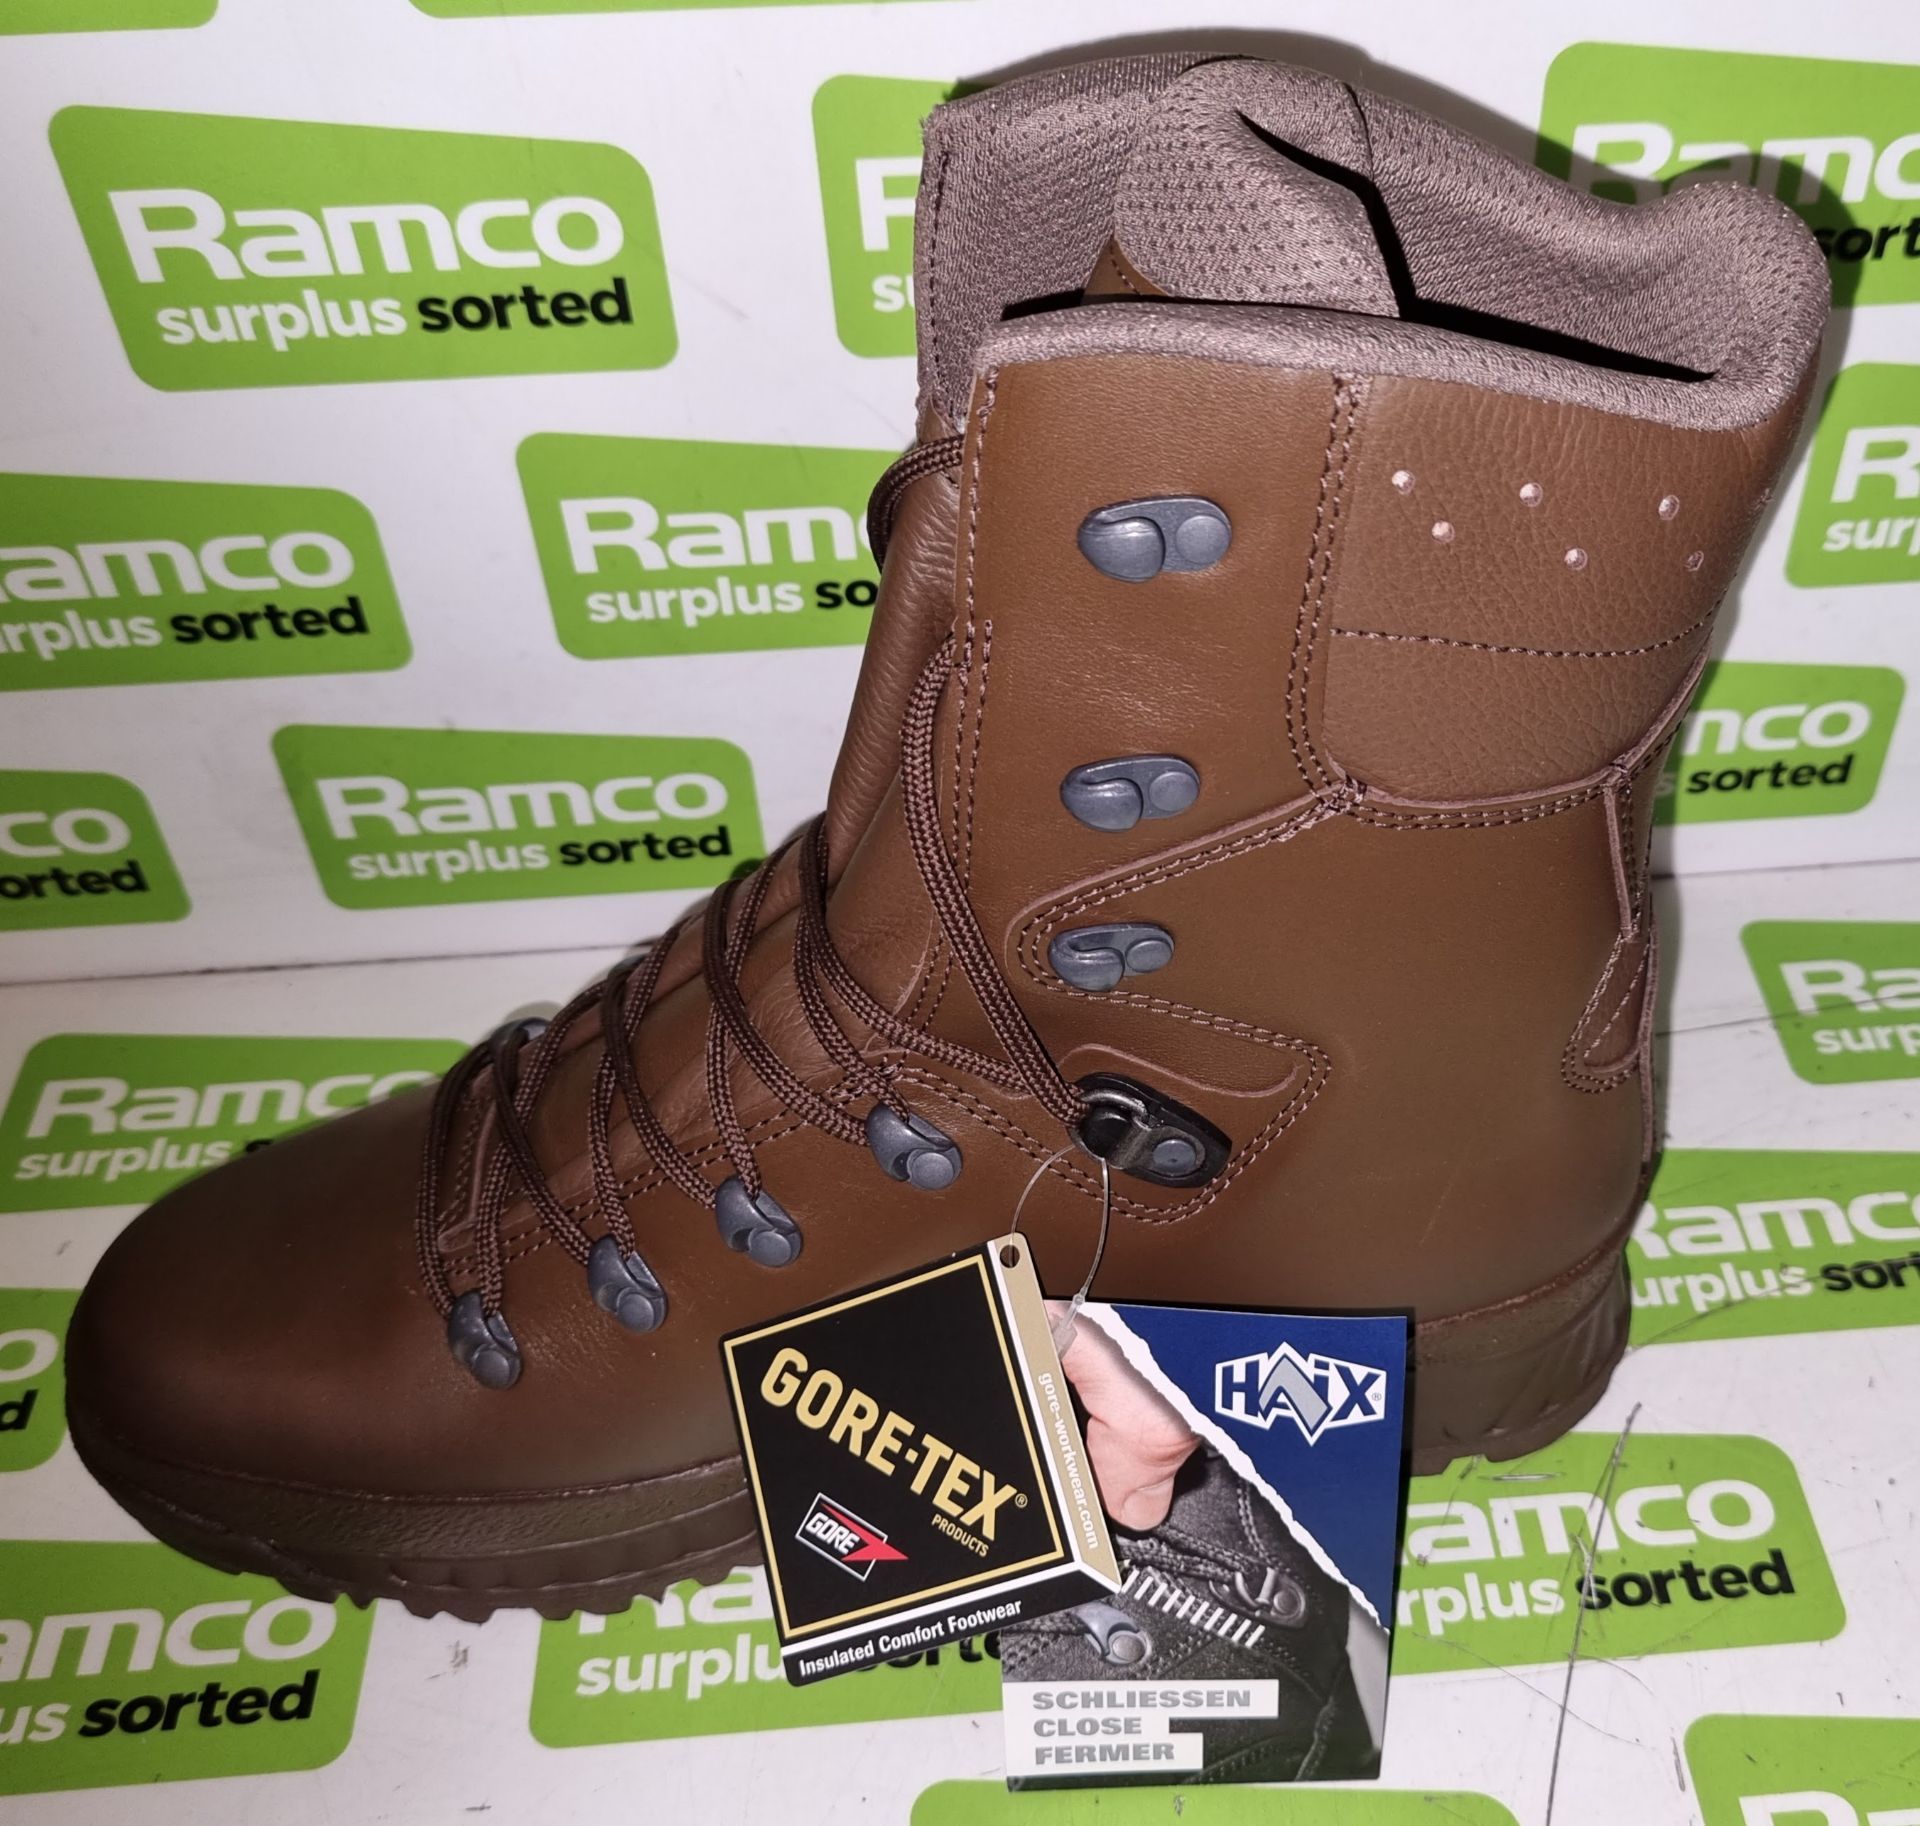 18x pairs of Haix cold wet weather boots - Size 10M - Image 3 of 5